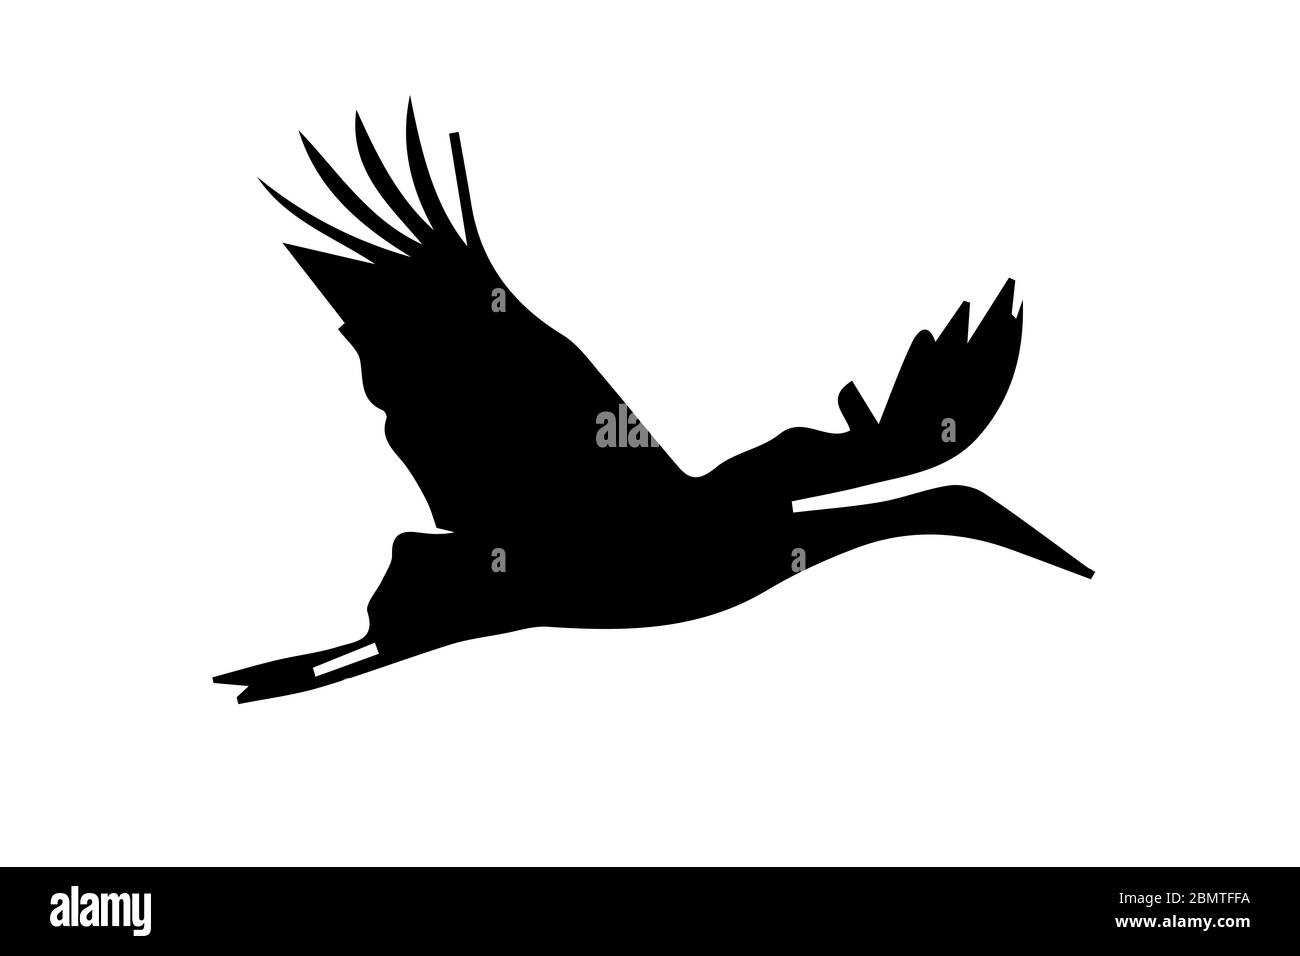 Silhouette of stork on white background Stock Photo